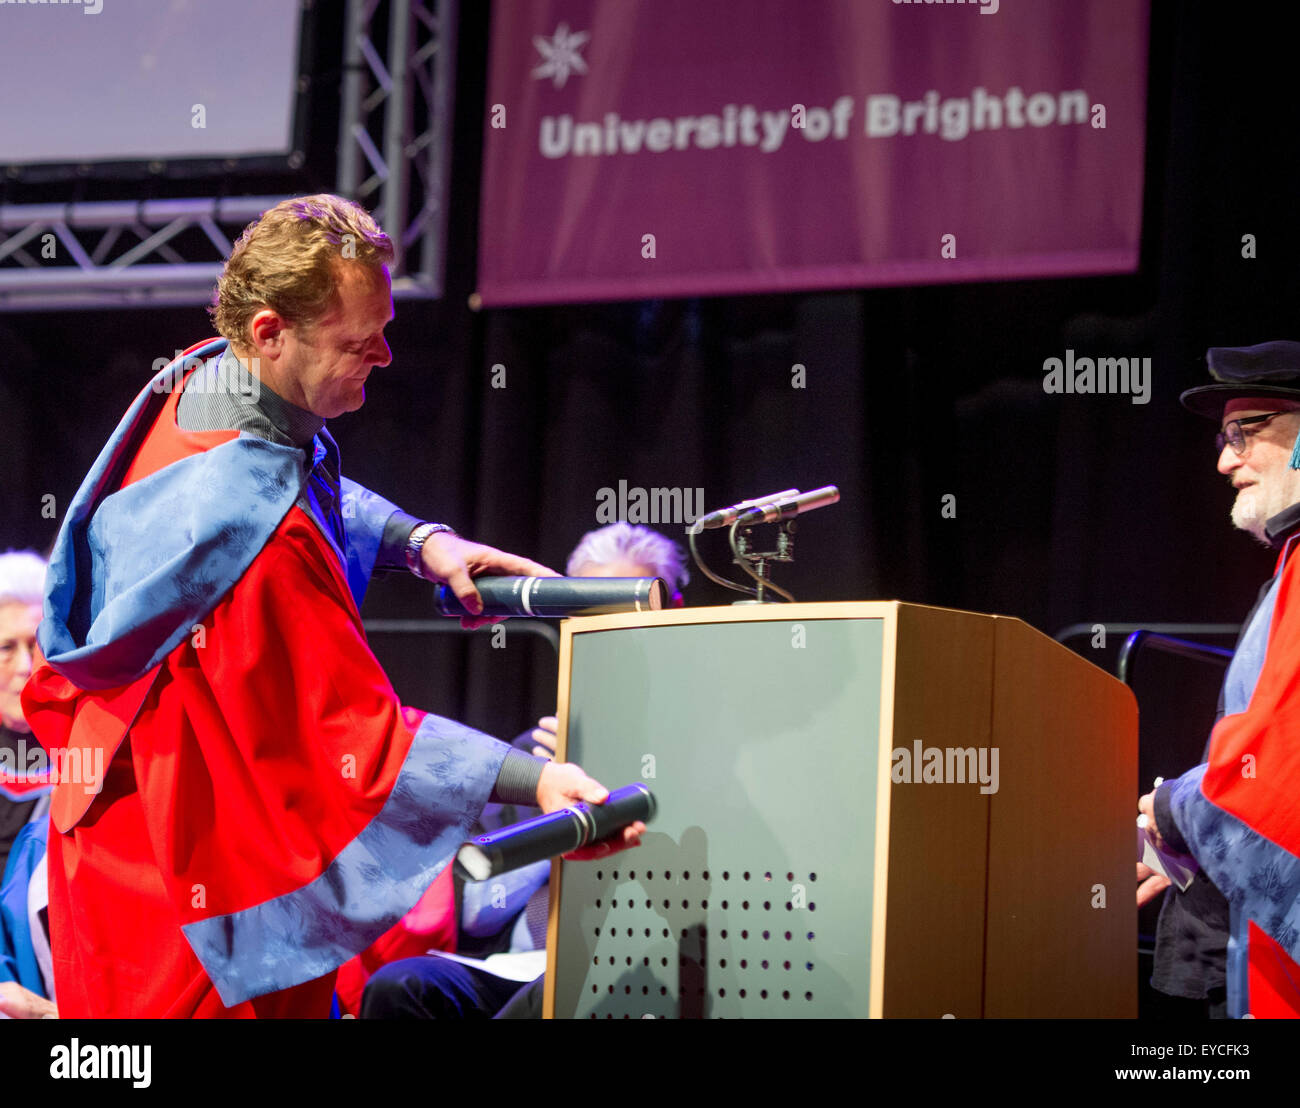 Brighton, UK. 27th July, 2015. Summer graduations at the University of Brighton. Luke Cresswell (left) and Steve McNicholas (right) the founders of Stomp were awarded honorary degrees as Doctor of Arts at the ceremony held this mornining at the Dome in Brighton. The pair celebrate using their scrolls as percussion sticks on the podium in their acceptance speach. Credit:  Jim Holden/Alamy Live News Stock Photo